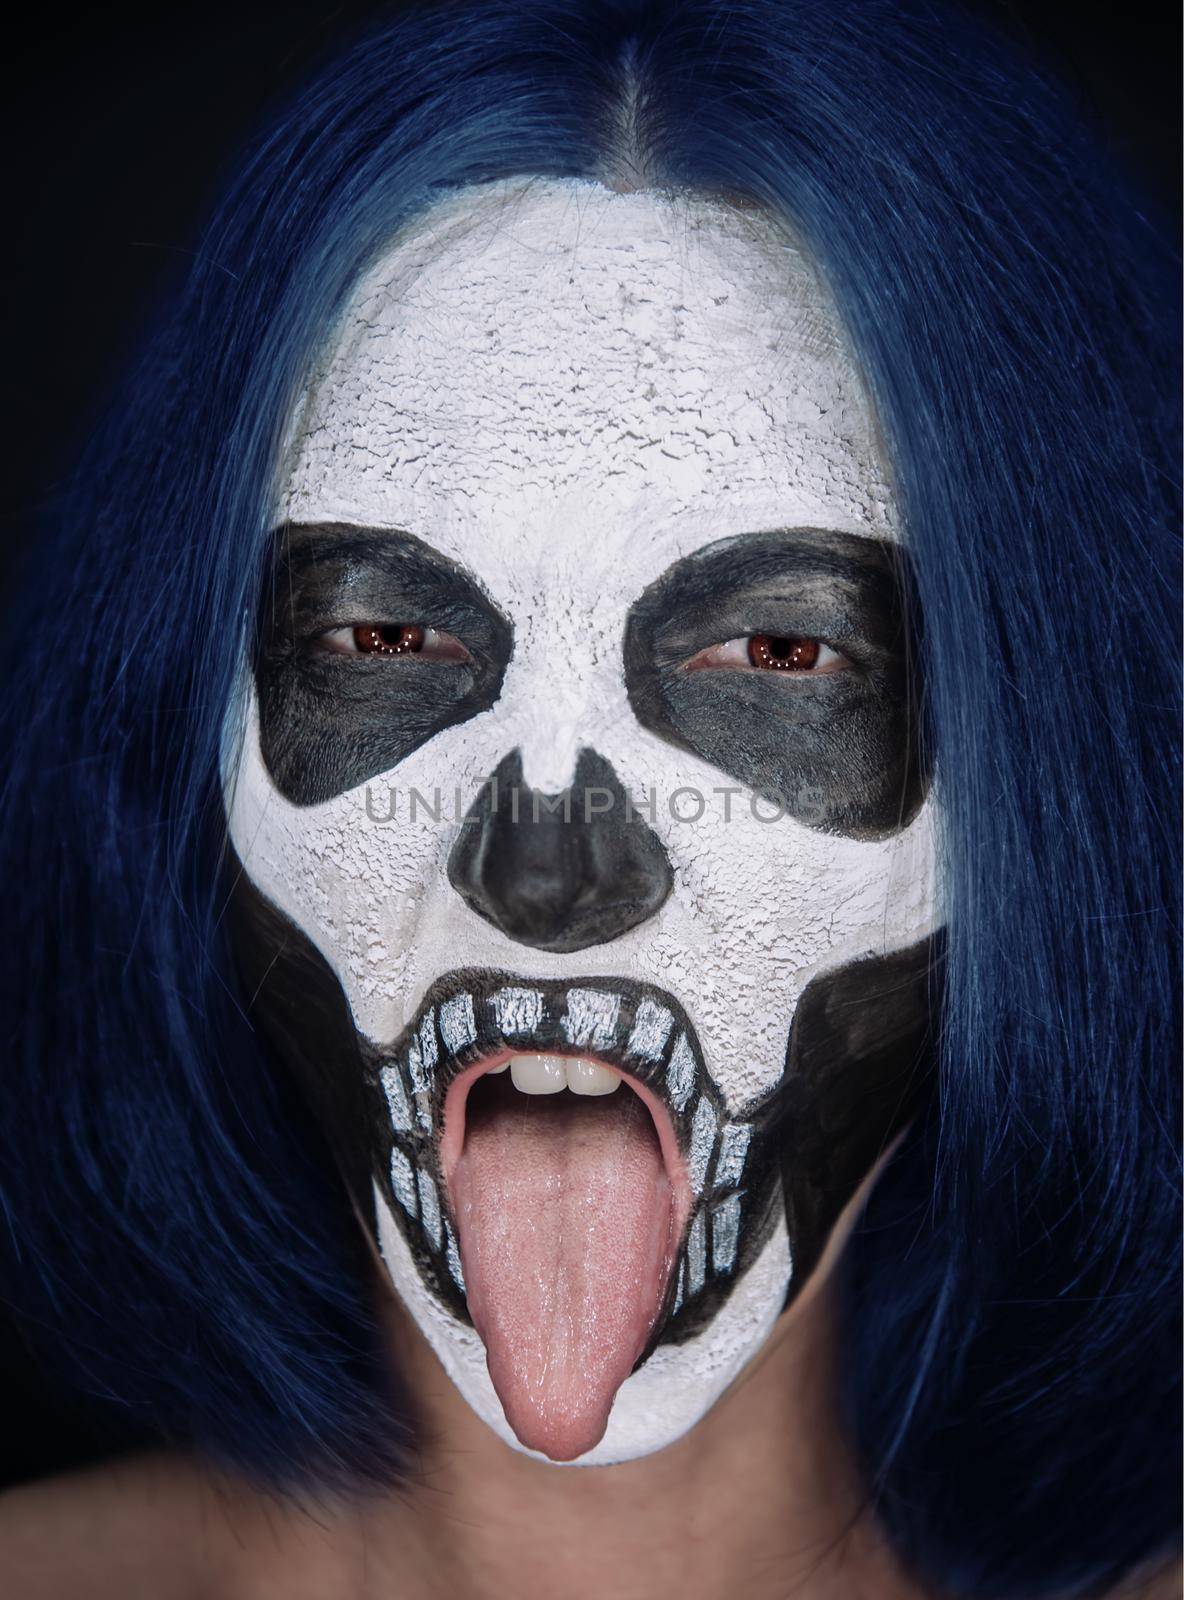 Woman with skull makeup and blue hair showing tongue on dark background, Halloween or horror theme